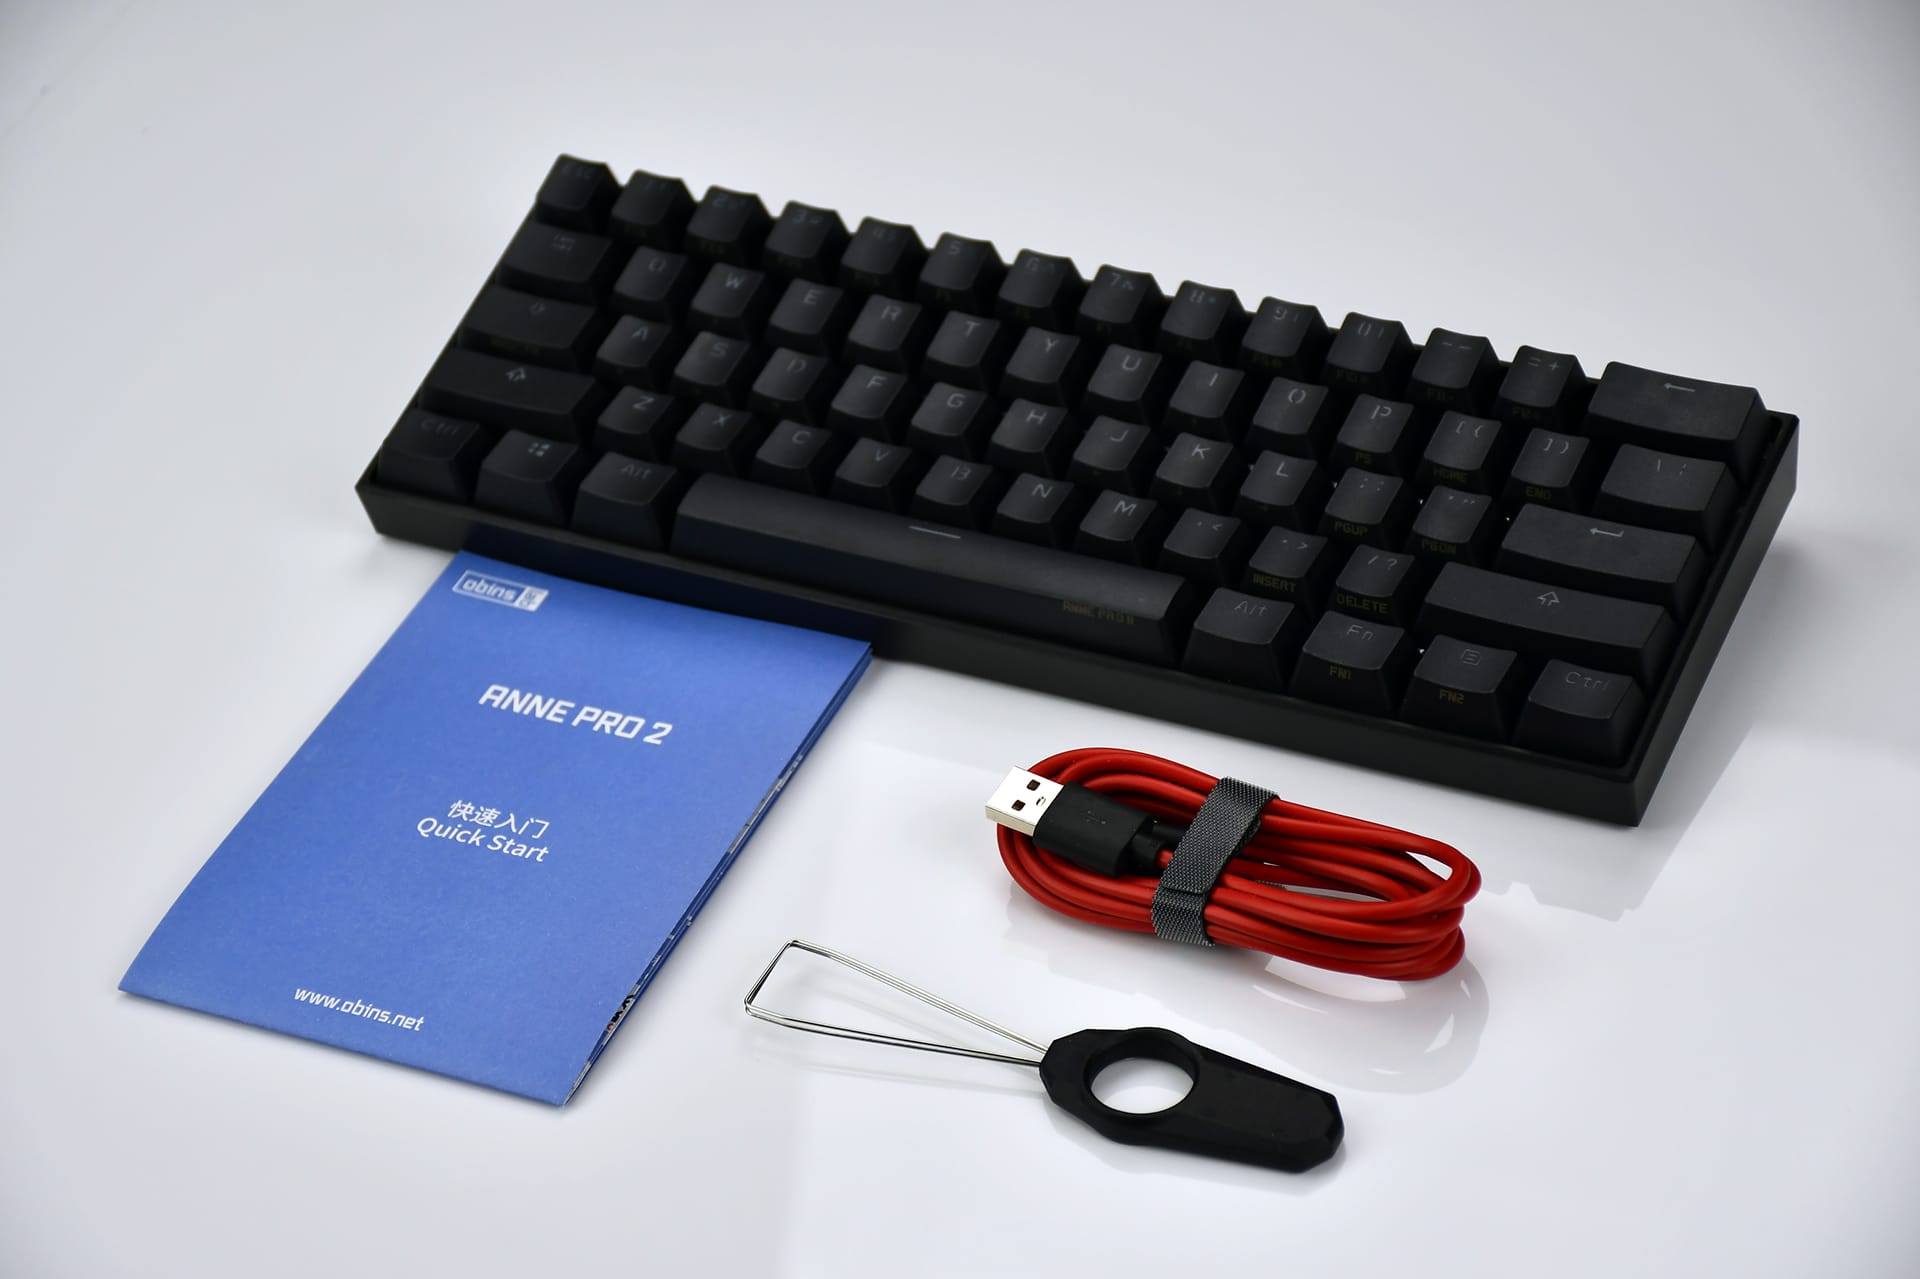 Anne Pro 2 RGB Bluetooth Keyboard with New Retooled Kailh Box switches